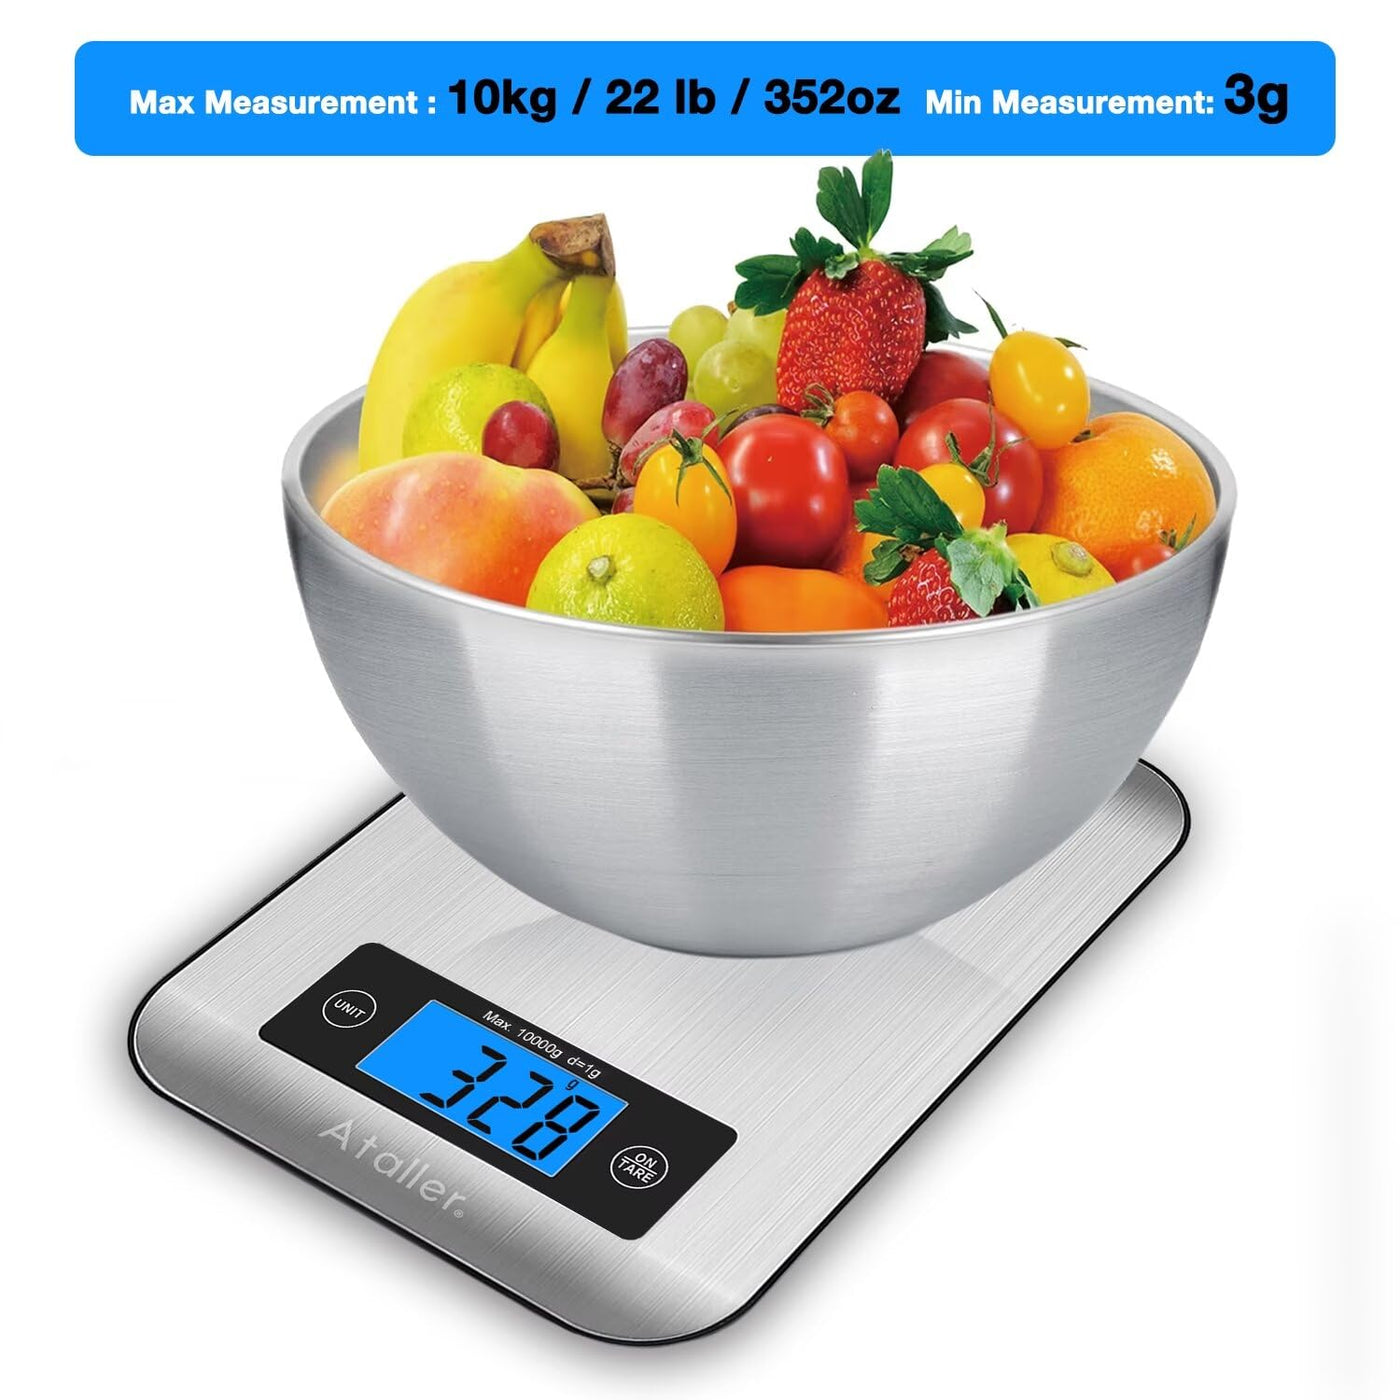 Digital Kitchen Scales, 304 Stainless Steel Food Scales, Professional Food Weighing Scales with Large LCD Display, Incredible Precision up to 1g (10kg Maximum Weight), Silver